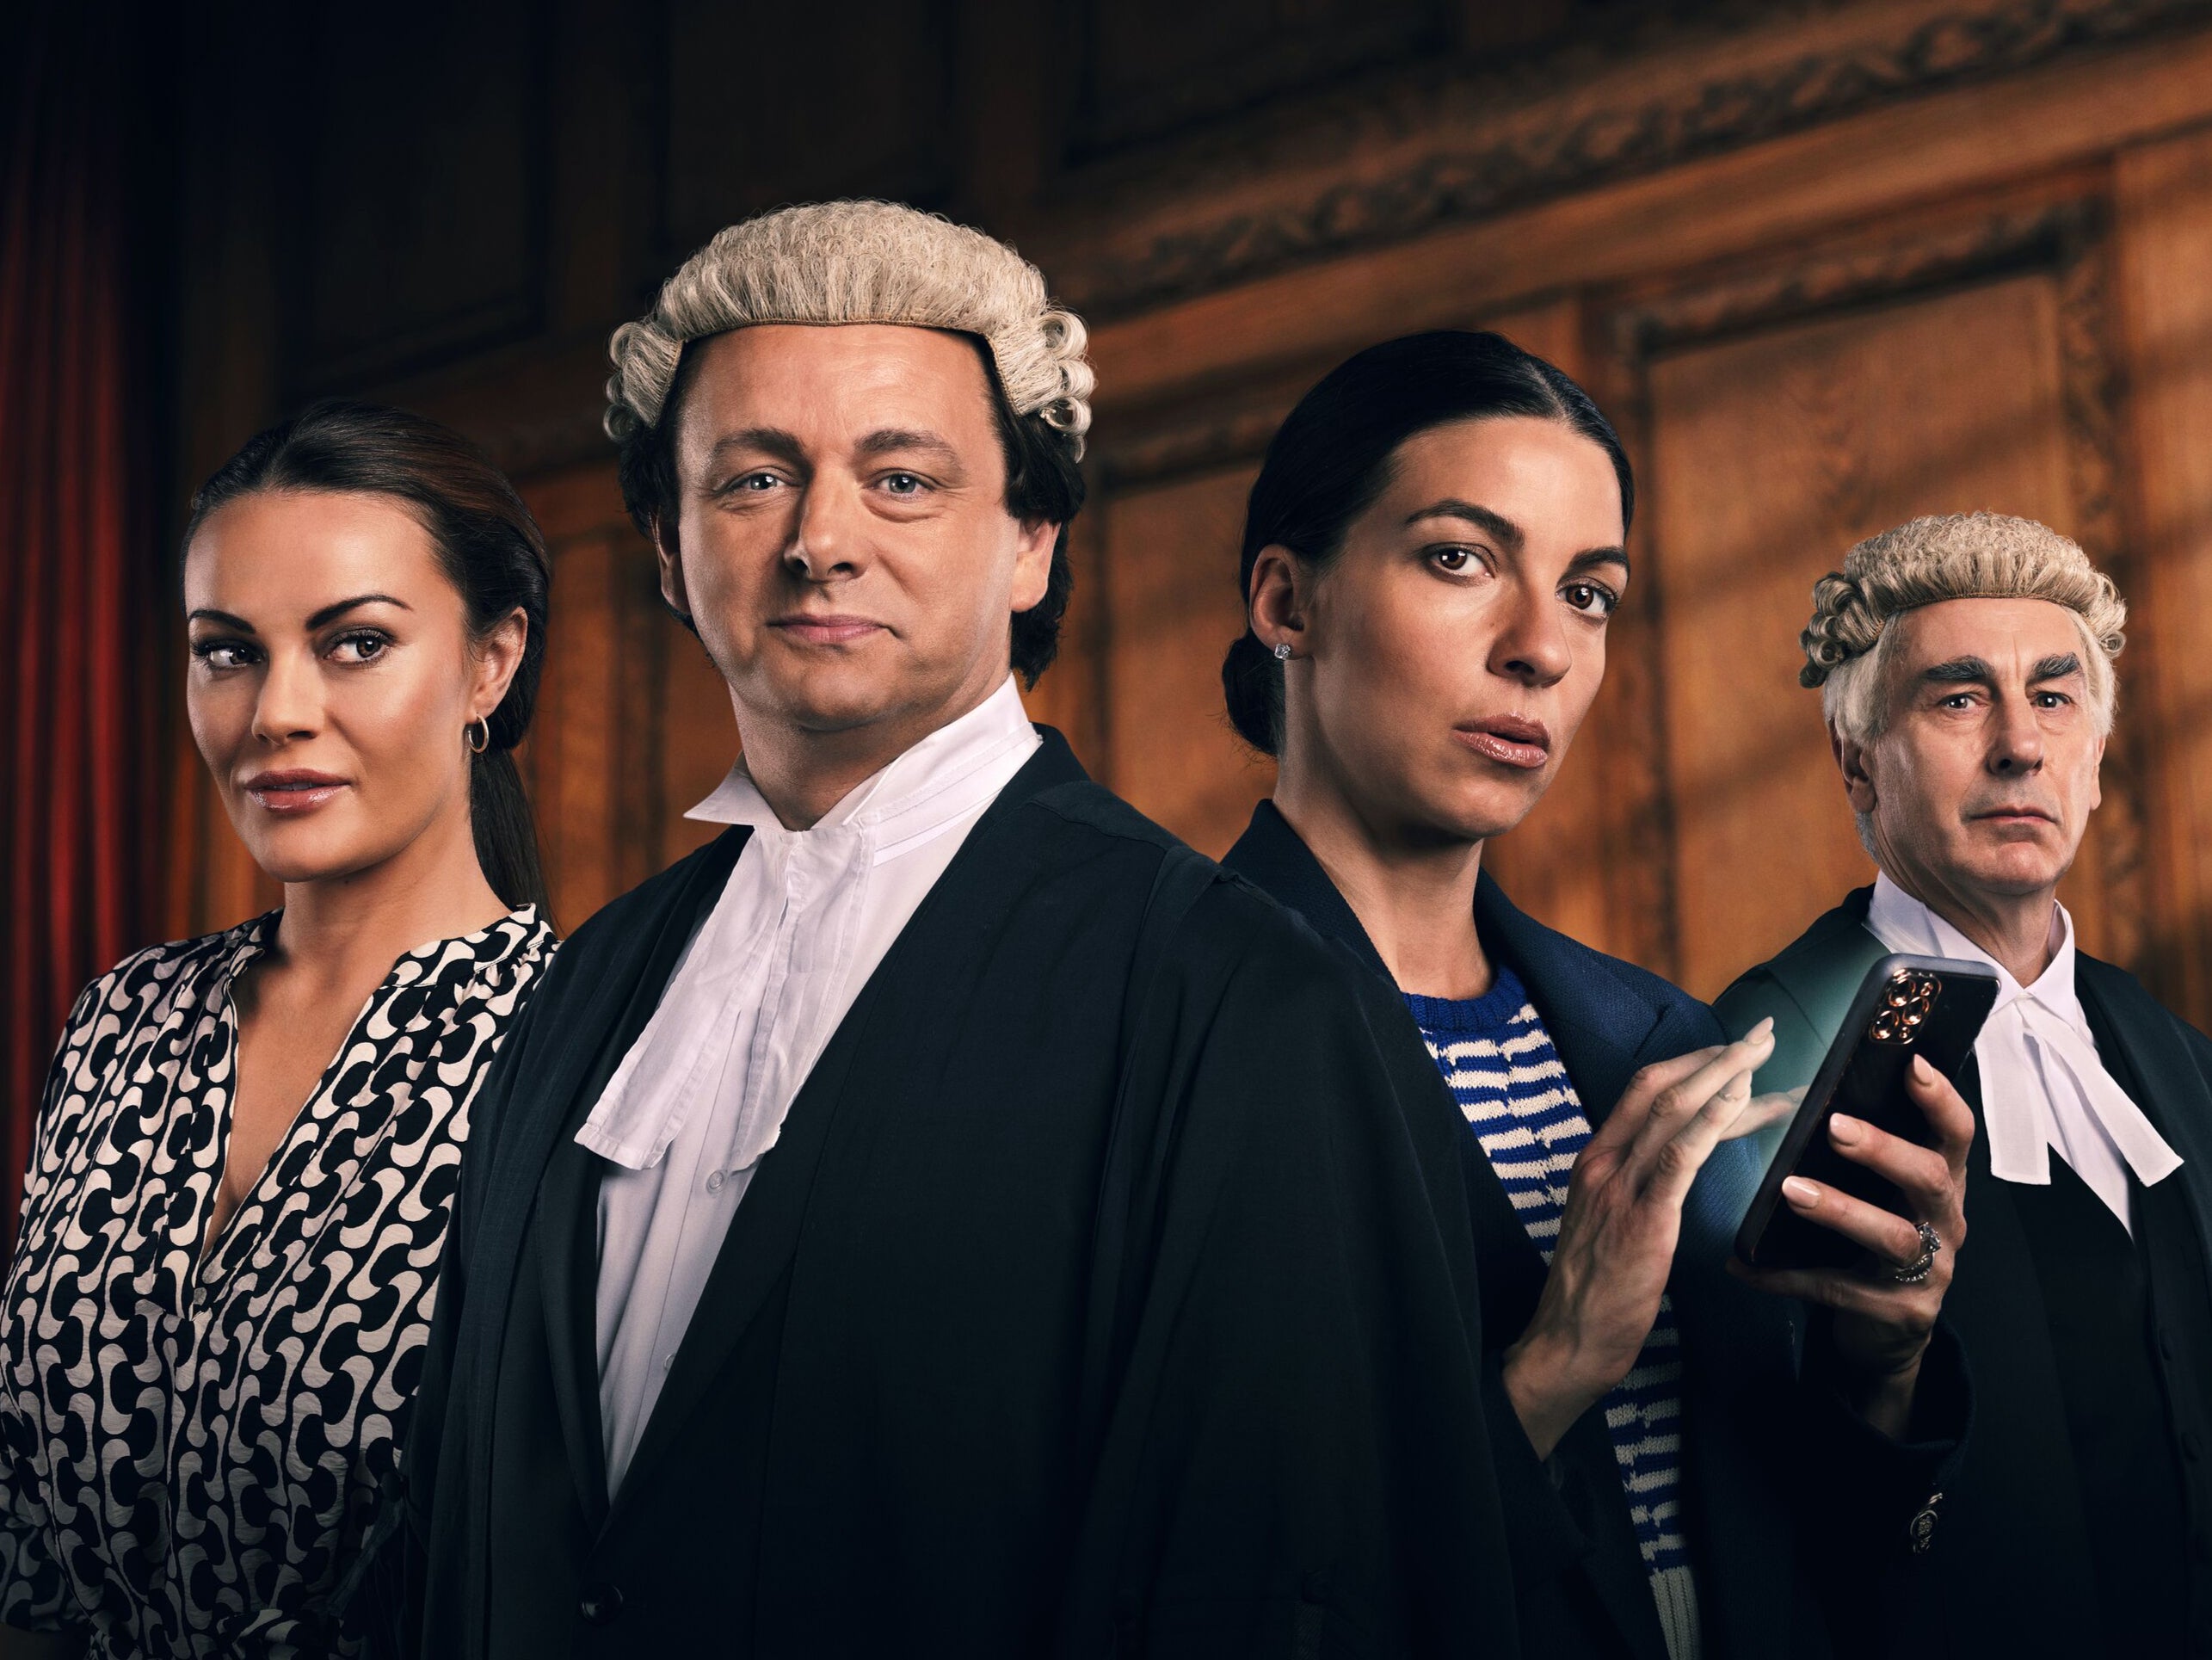 Chanel Cresswell, Michael Sheen, Natalia Tena and Simon Coury in ‘Vardy v Rooney: A Courtroom Drama'